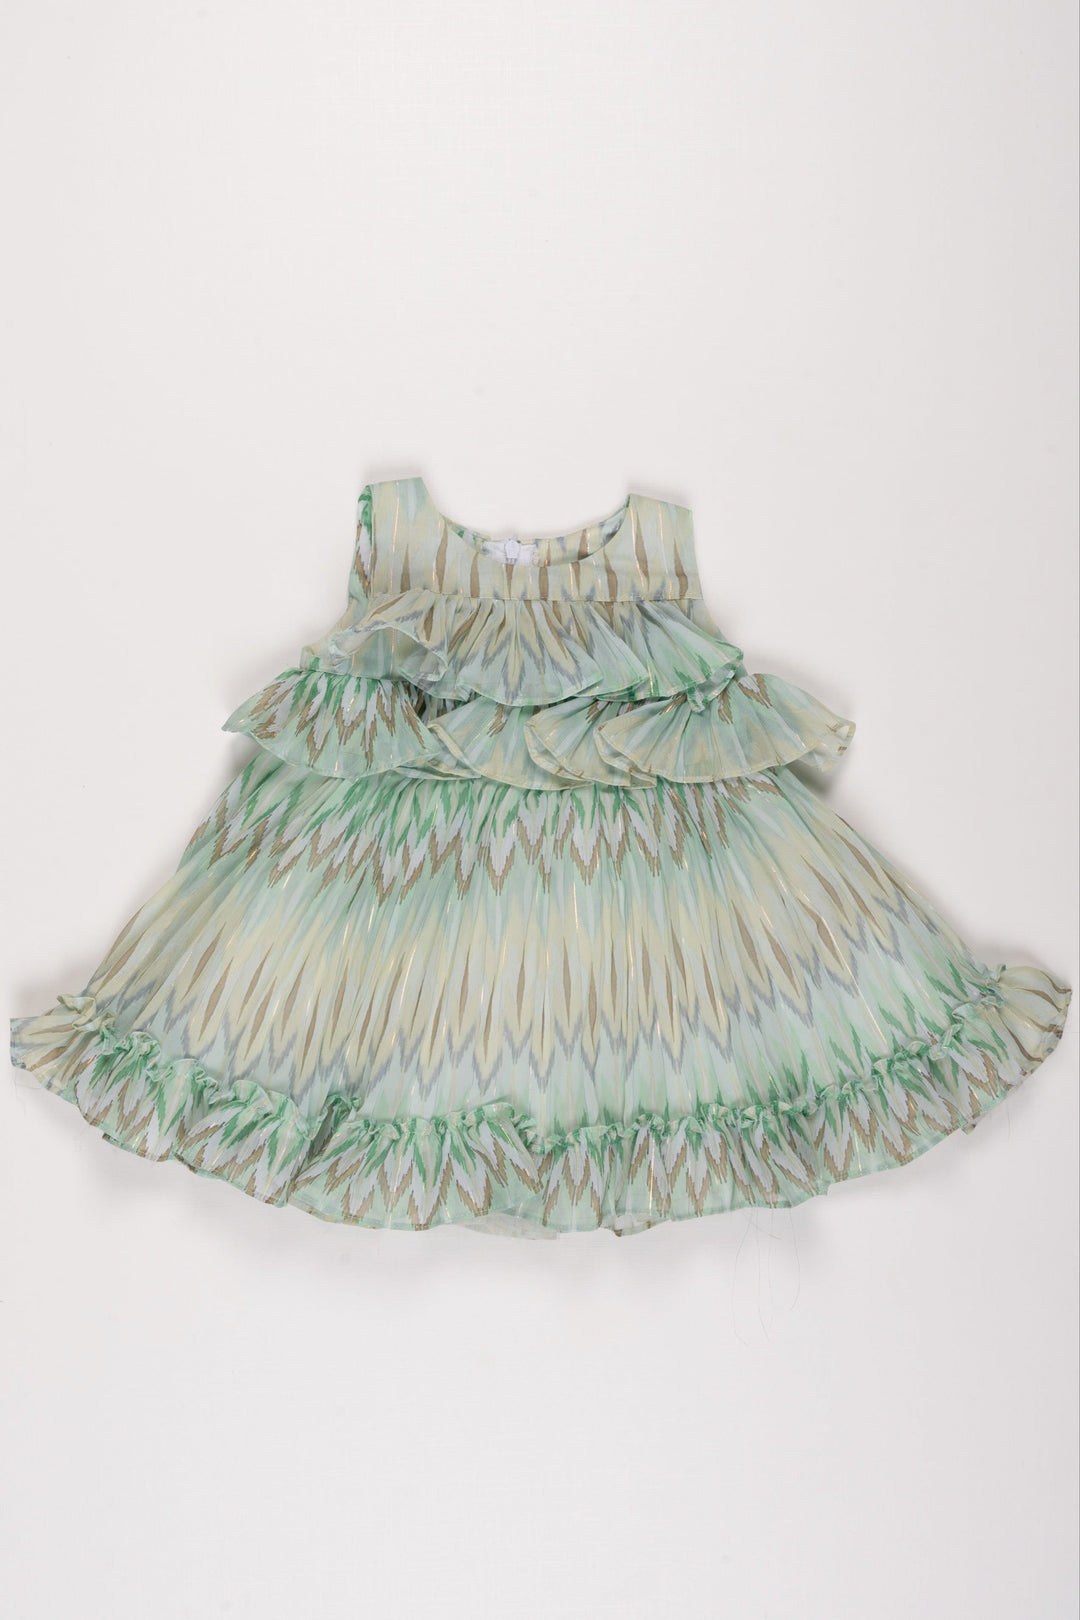 The Nesavu Girls Fancy Frock Featherlight Ruffle Frock: Ethereal Girls' Dress with Soft Feather Print Nesavu 16 (1Y) / Blue GFC1192B-16 Girls Blue Feather Print Dress | Spring Ruffle Frock | Whimsical Party Attire | The Nesavu